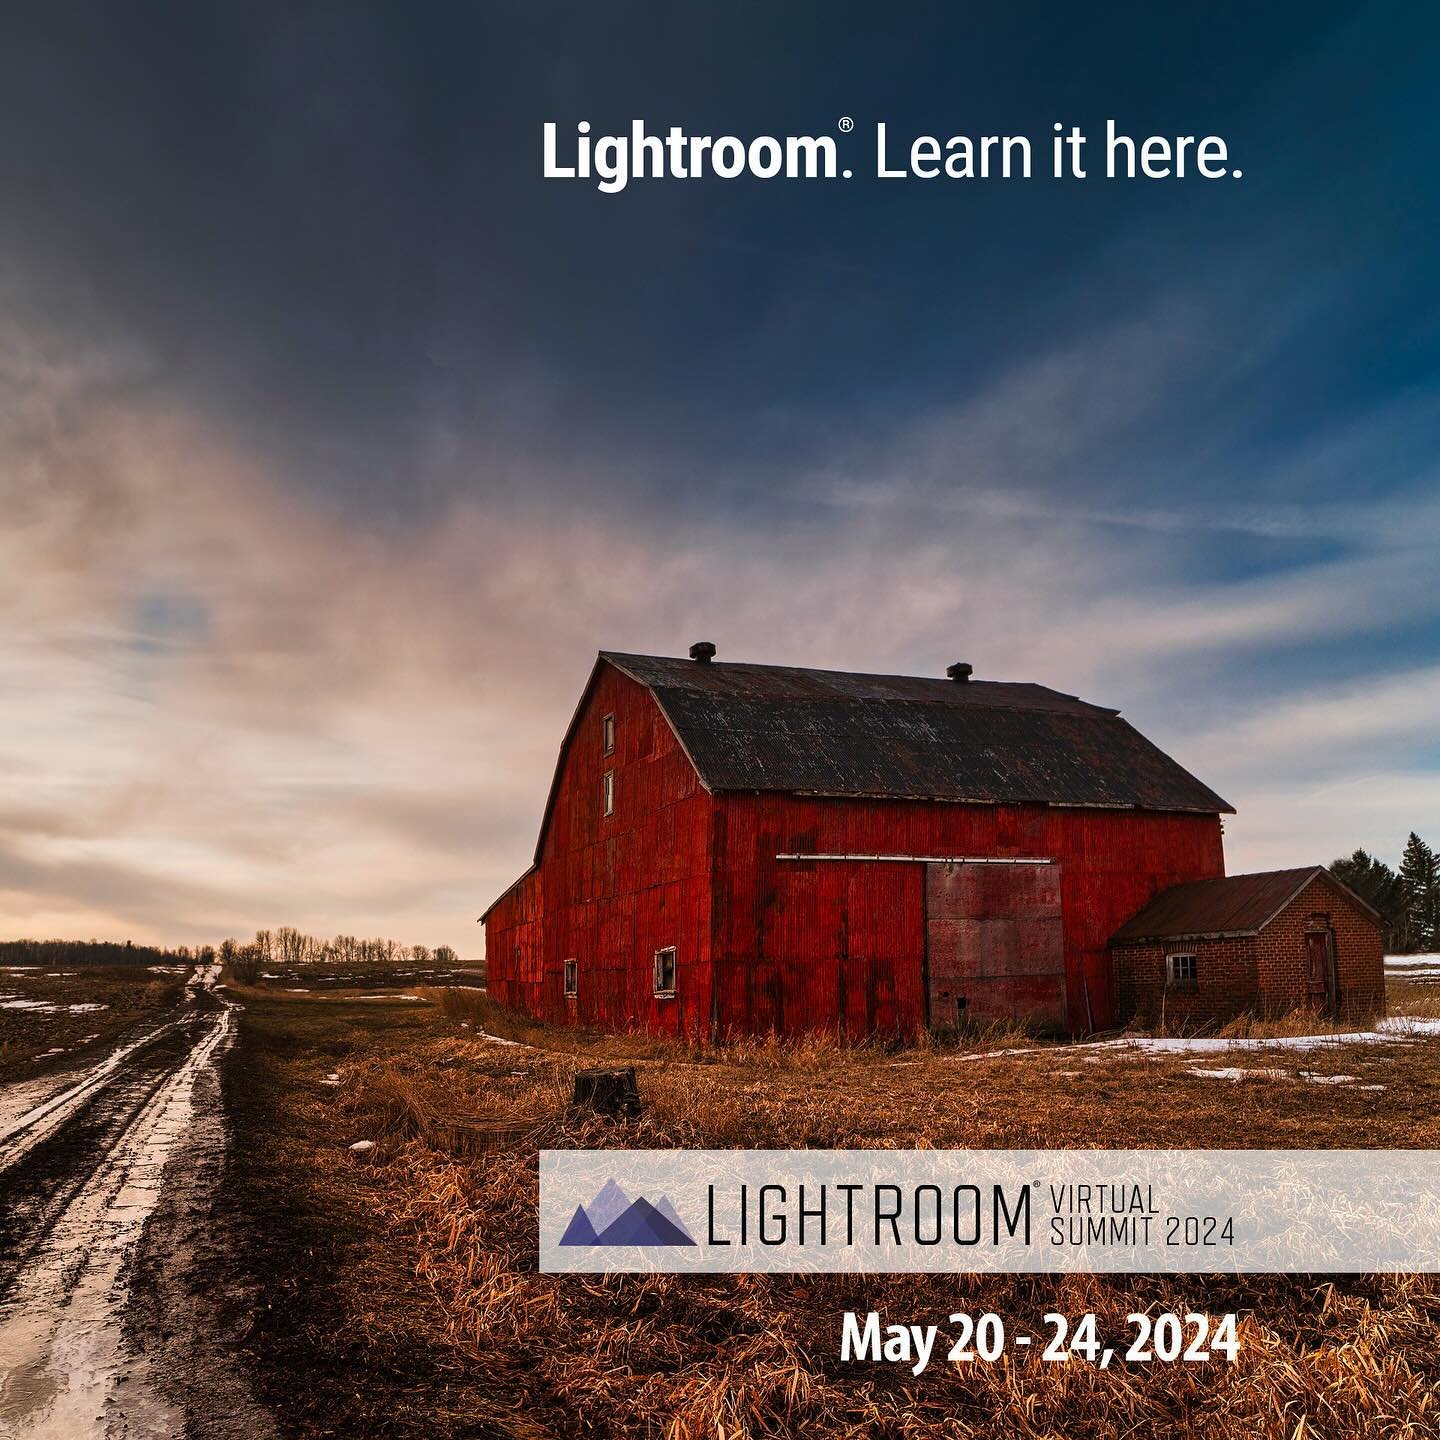 The Lightroom Virtual Summit is coming May 20th thru May 24th with 15 Instructors, 45 Lightroom Classes and over 30+ hours of content. You can GRAB A FREE PASS using the *** LINK IN BIO ***

#lightroom